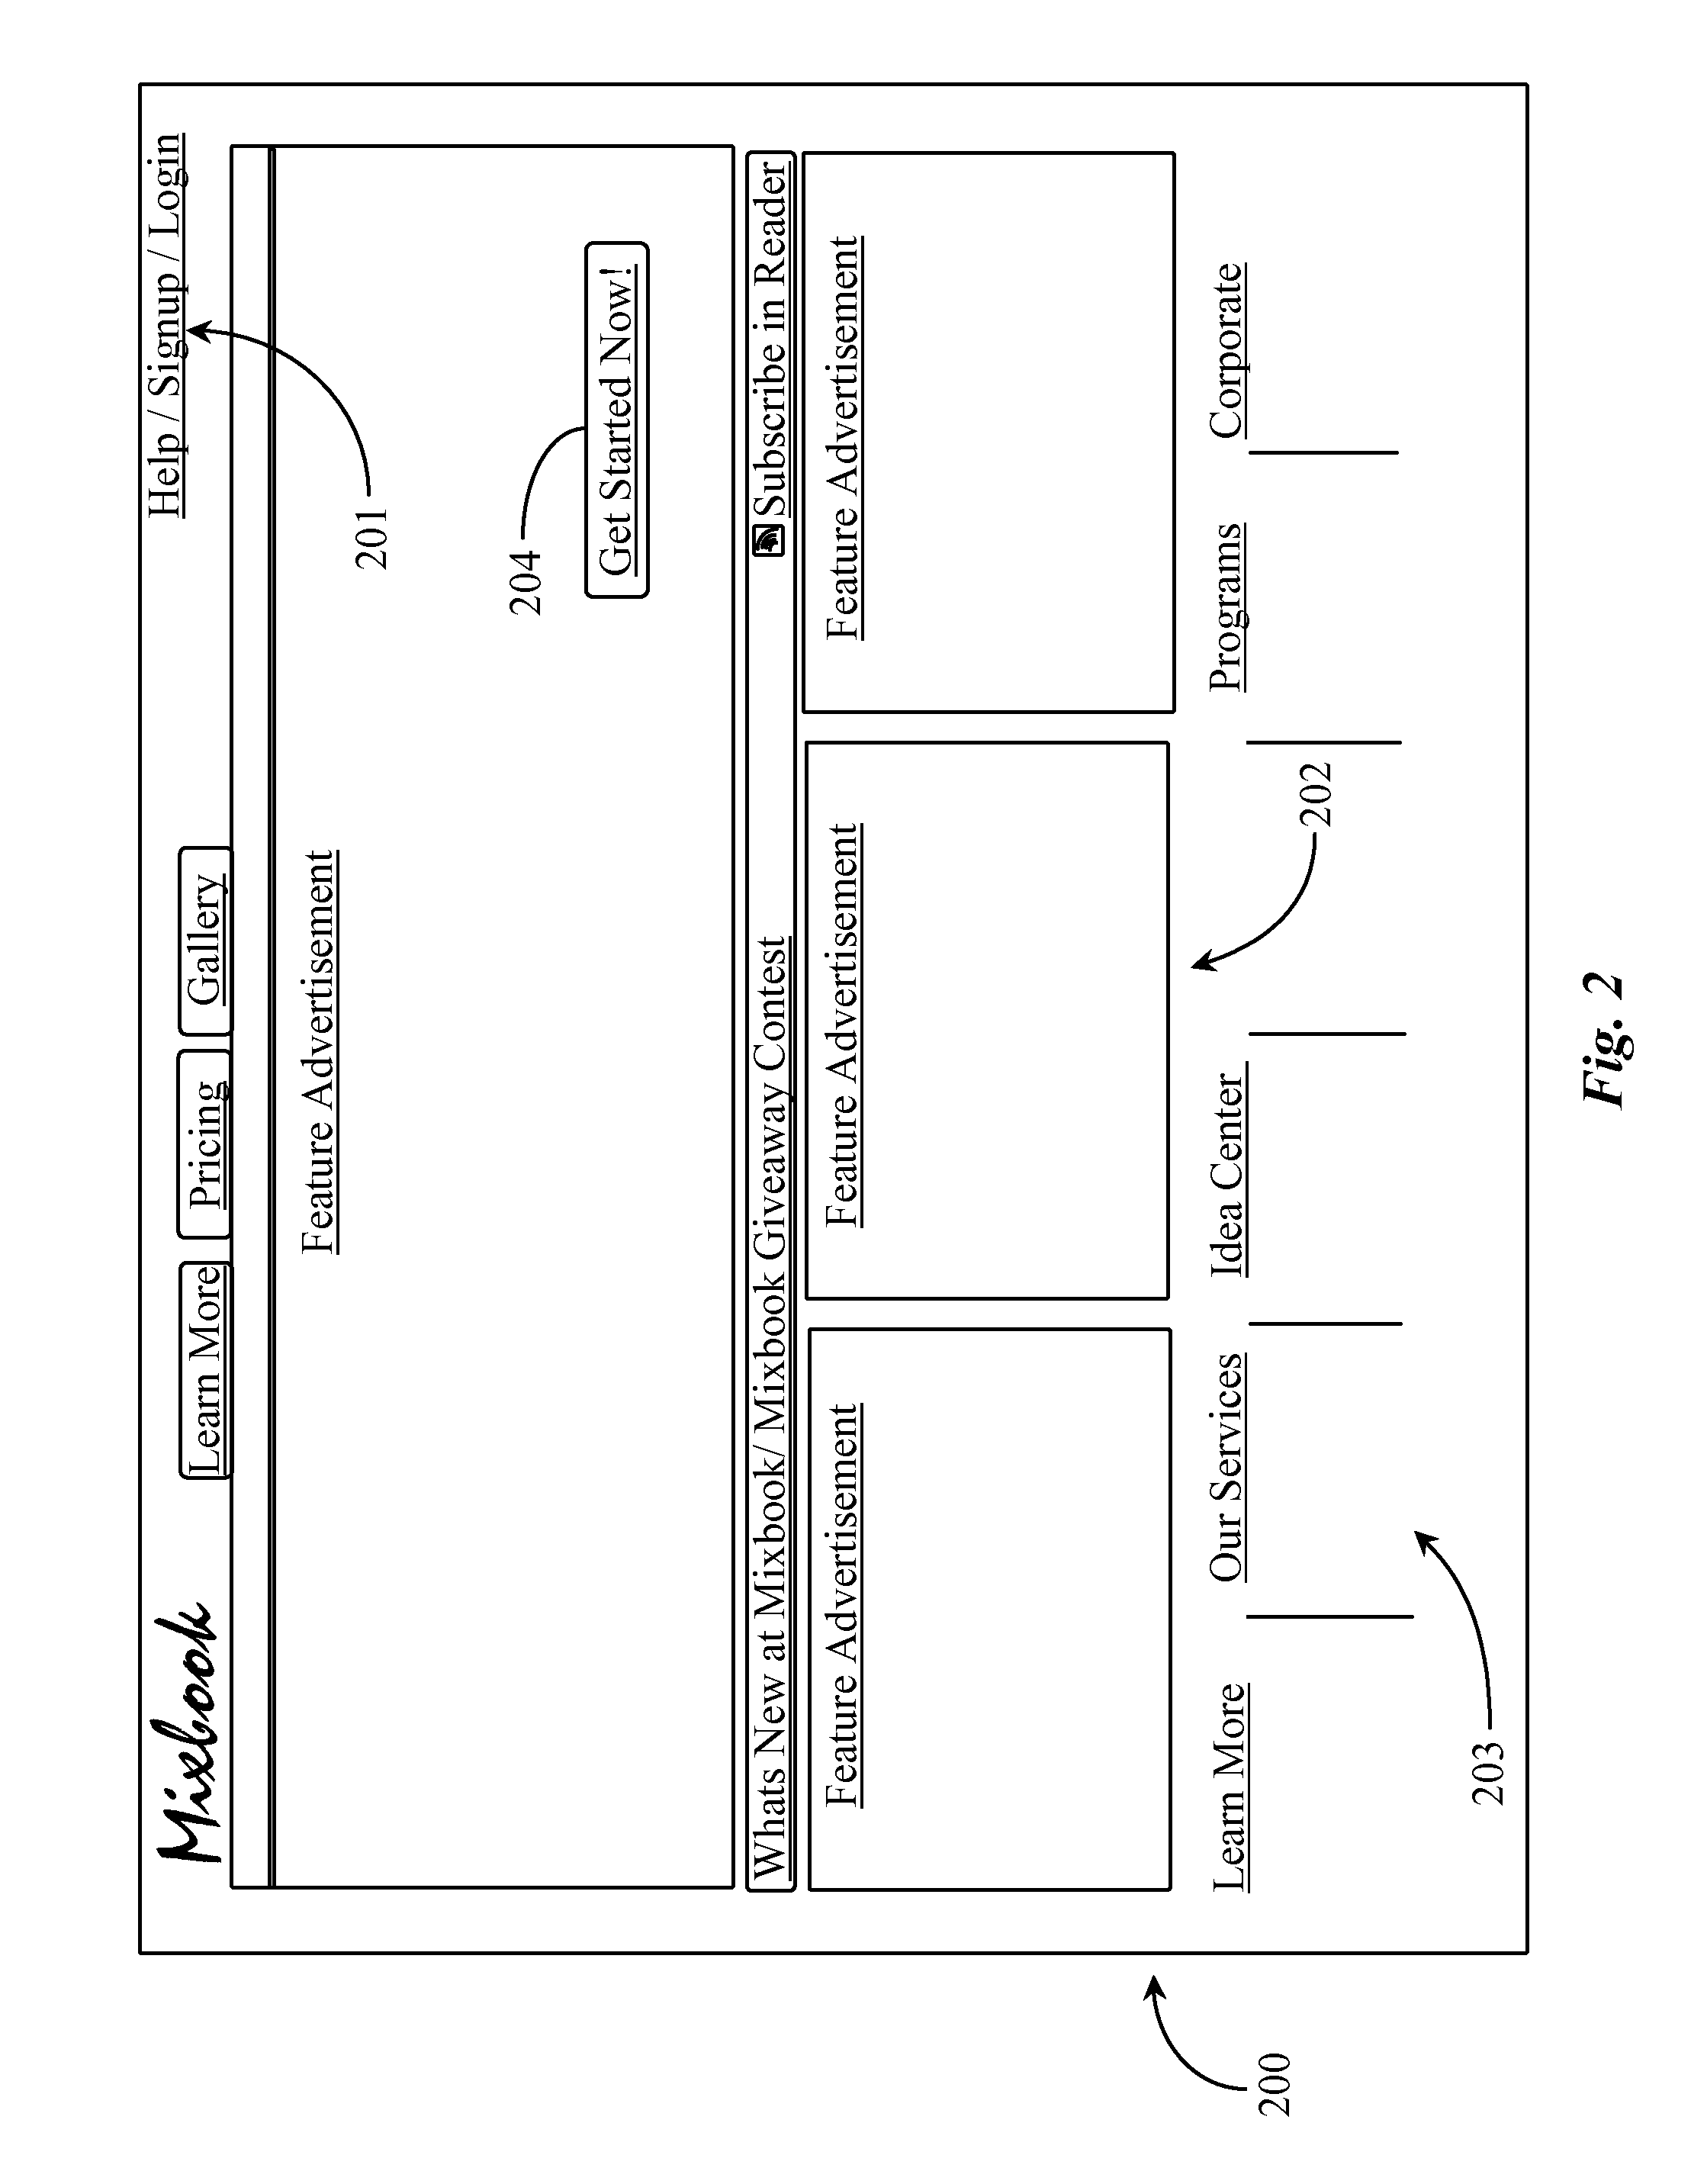 Method for Determining Effective Core Aspect Ratio for Display of Content Created in an Online Collage-Based Editor